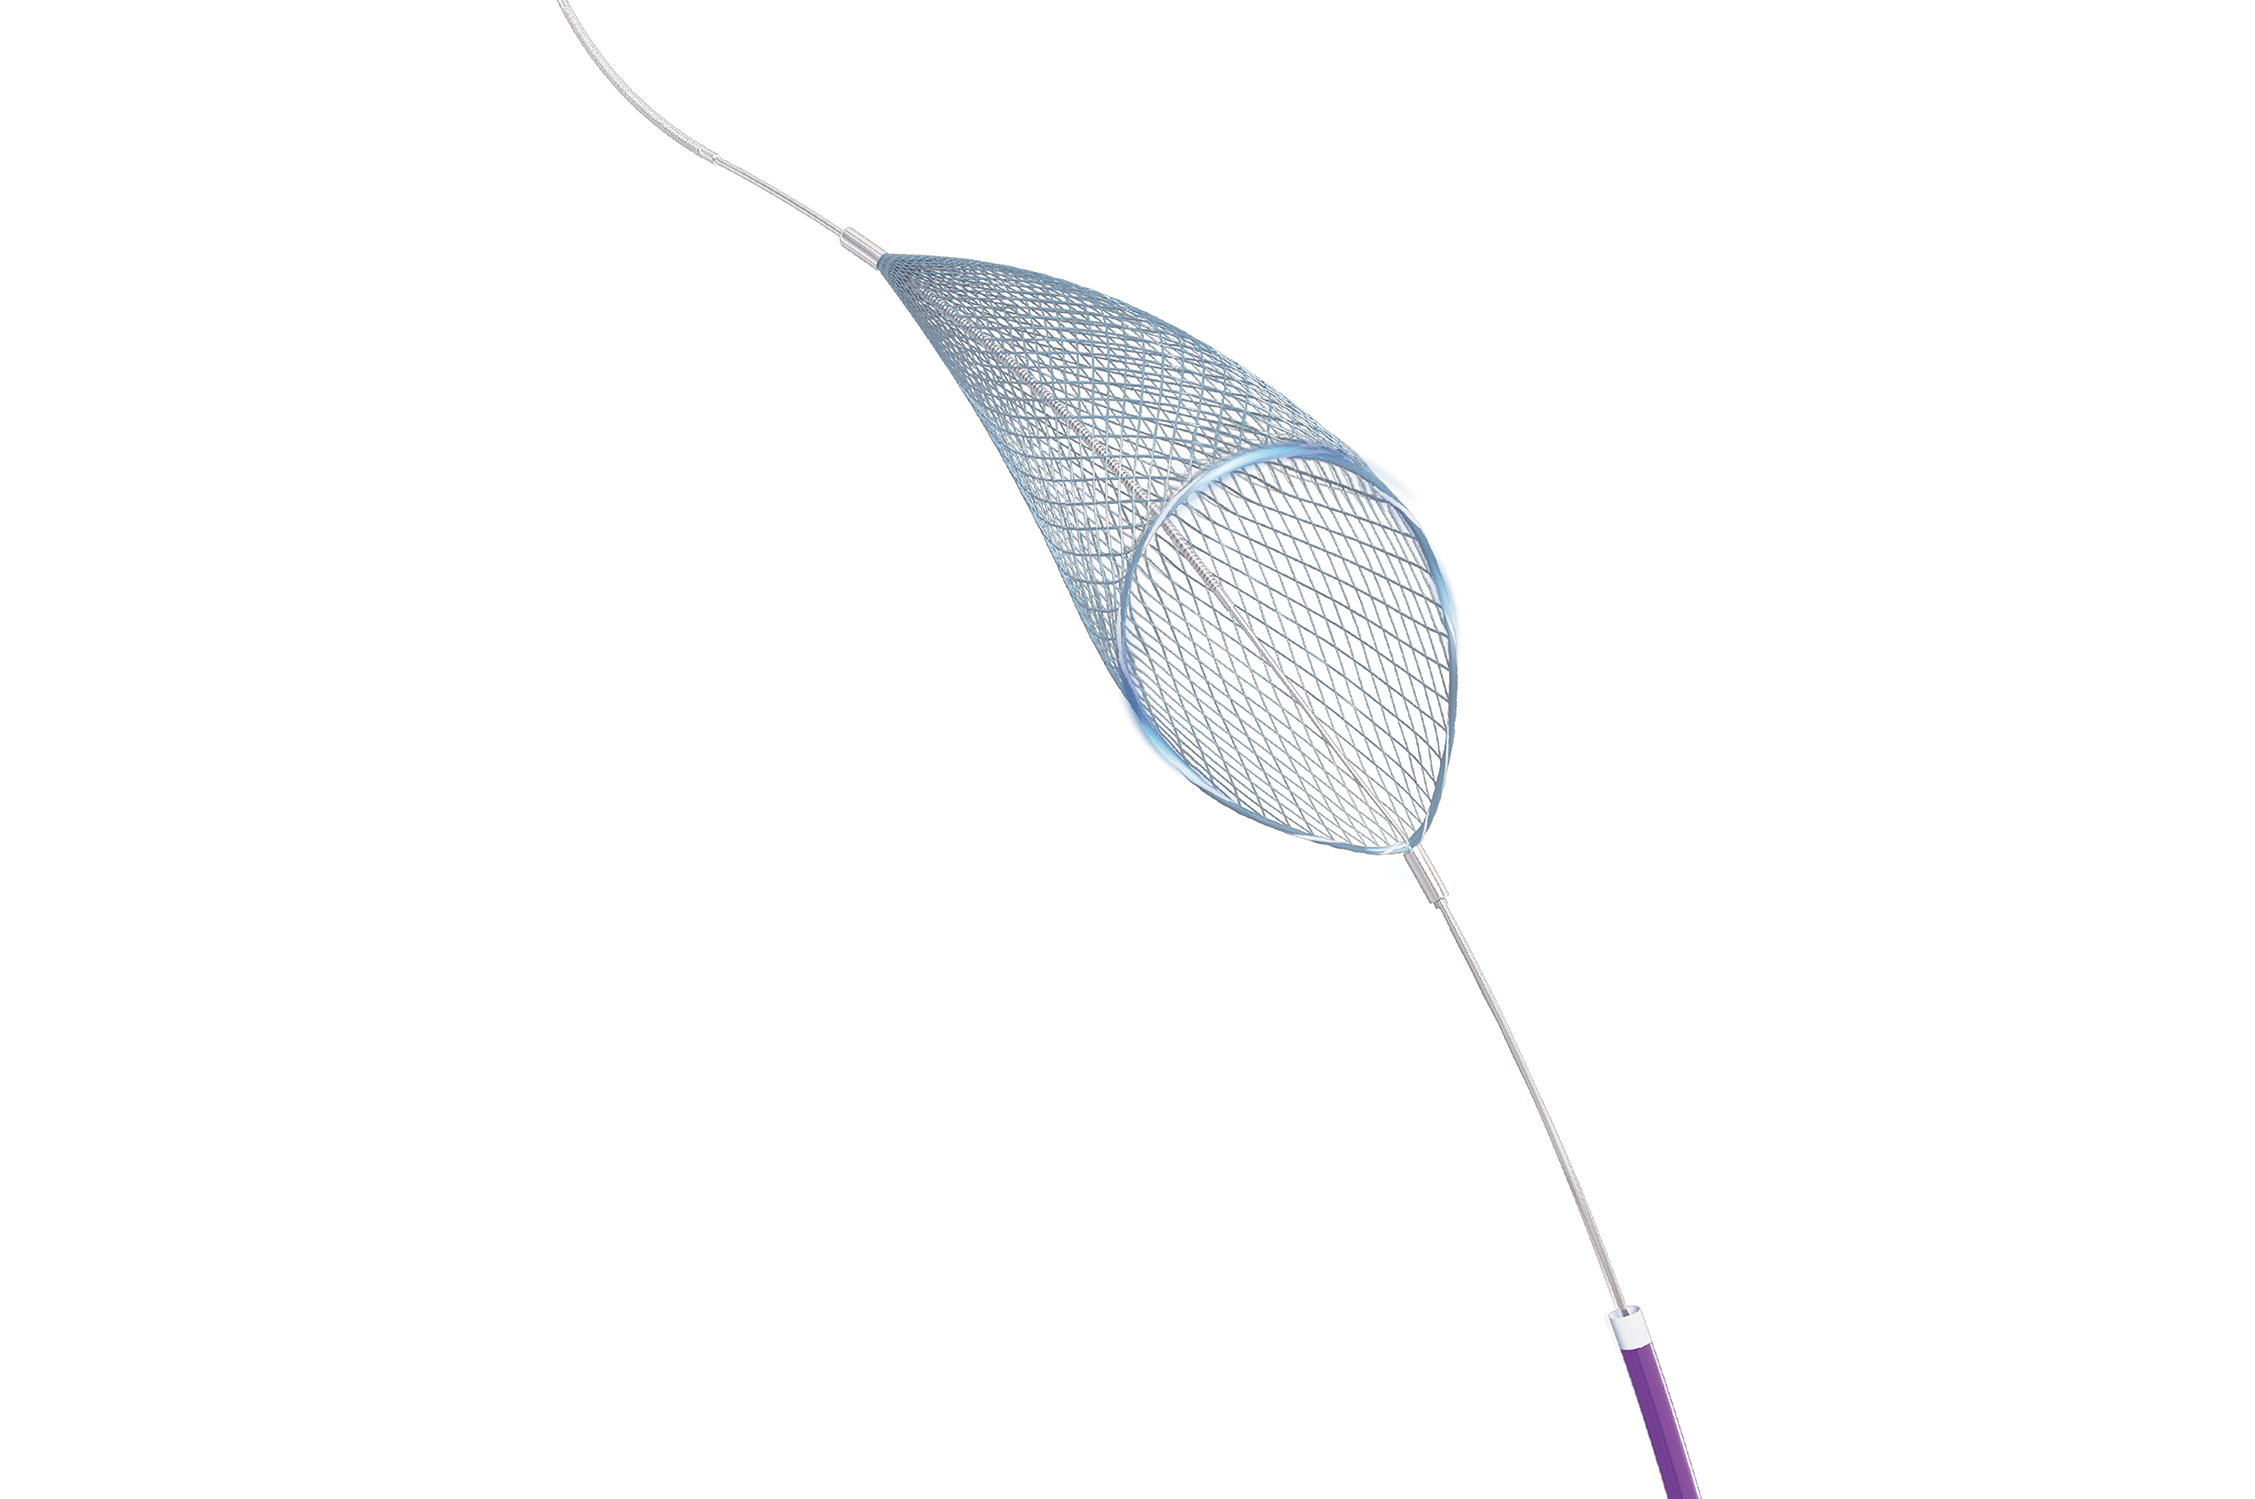 SkyKeeper ® Embolic Protection Device